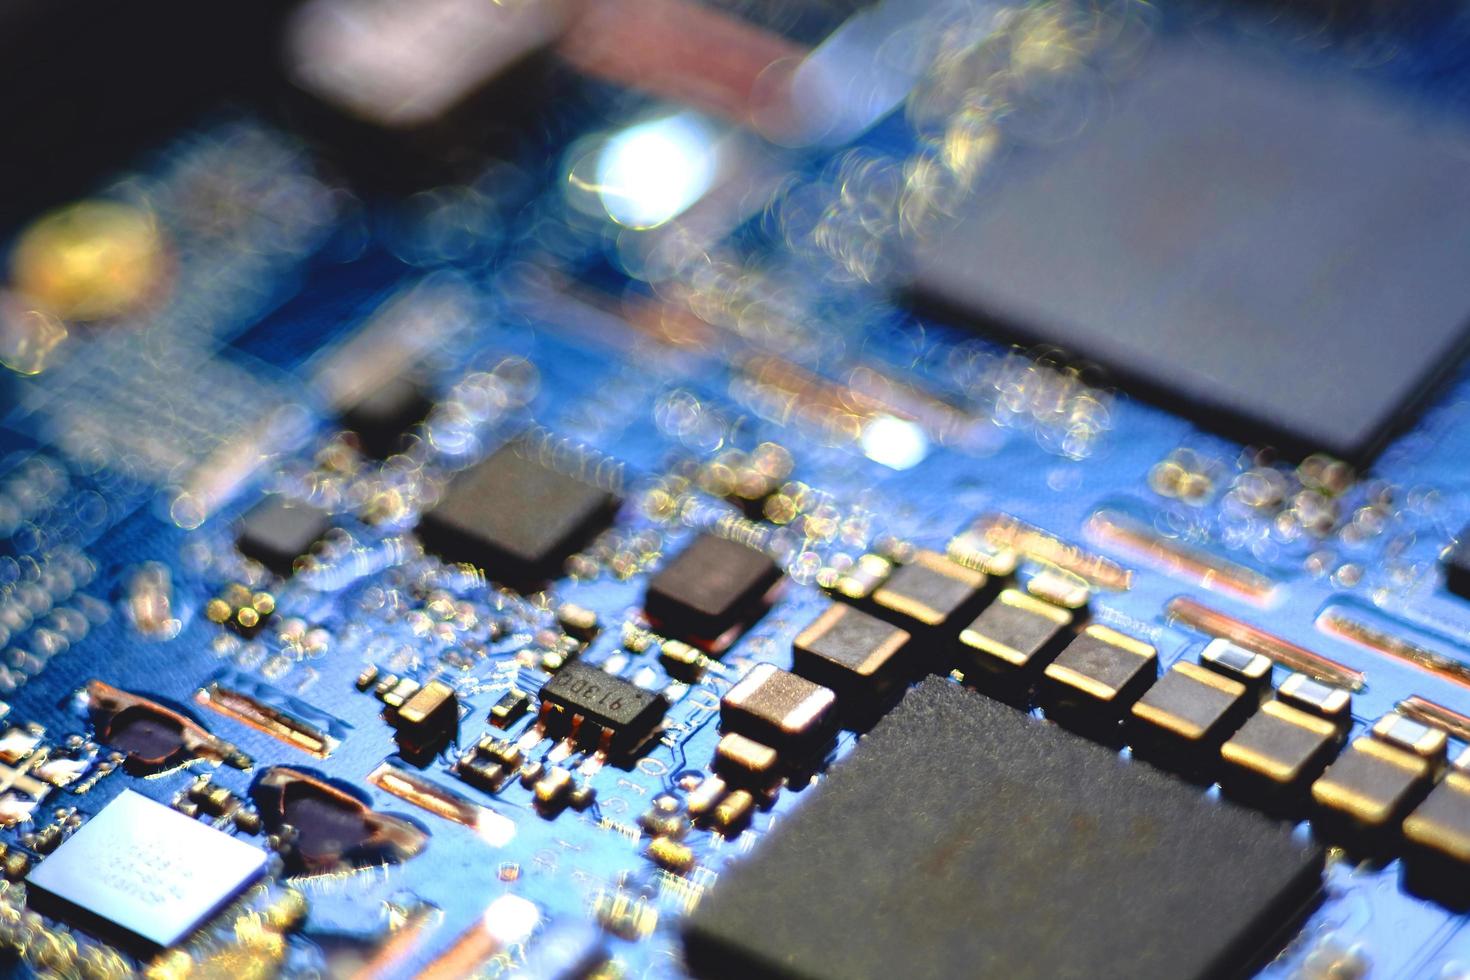 Close up image of a circuit board in blur. photo